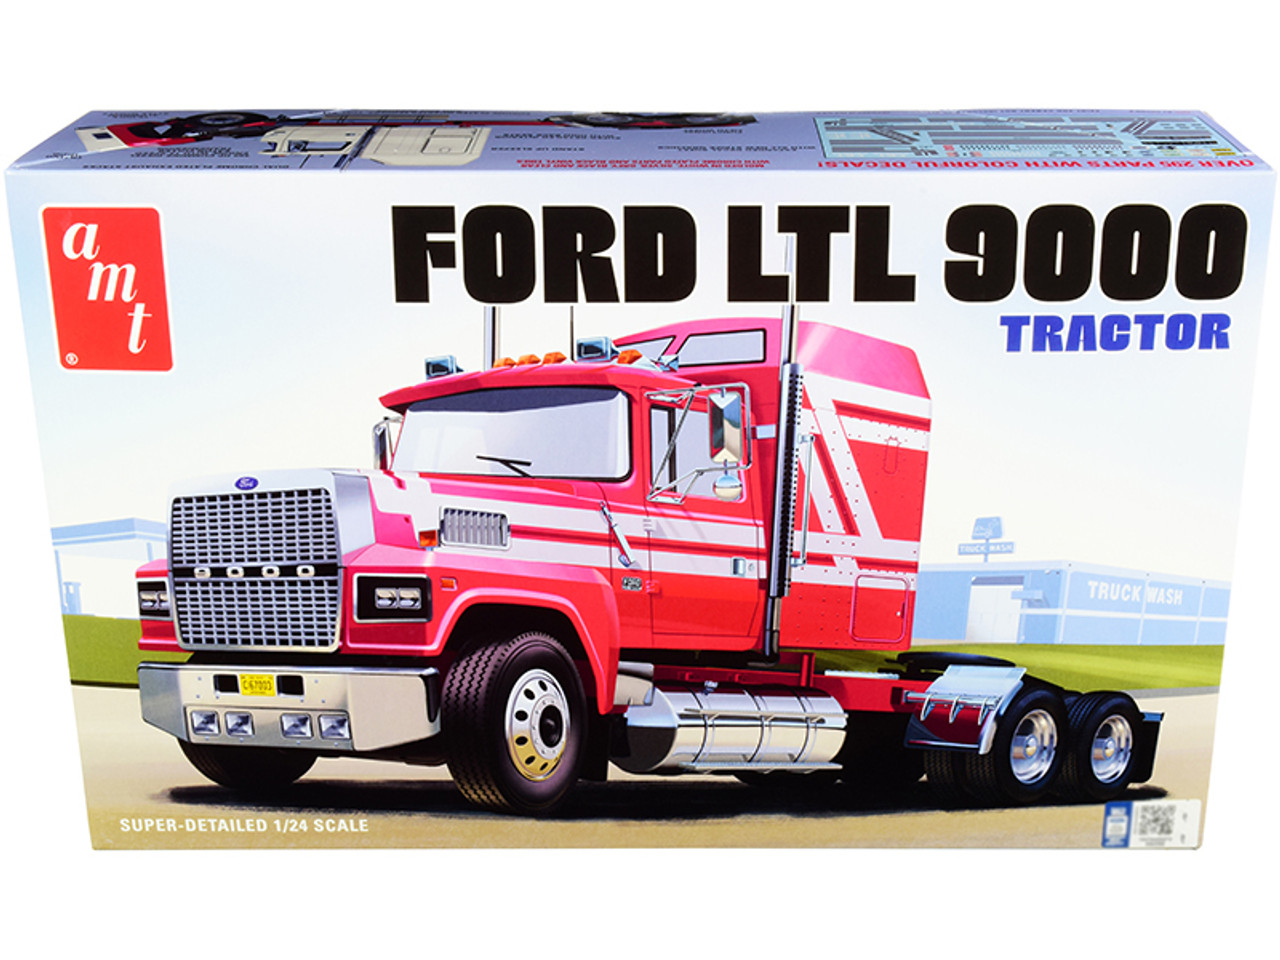 Skill 3 Model Kit Peterbilt 377 A/E Truck Tractor 1/24 Scale Model by AMT